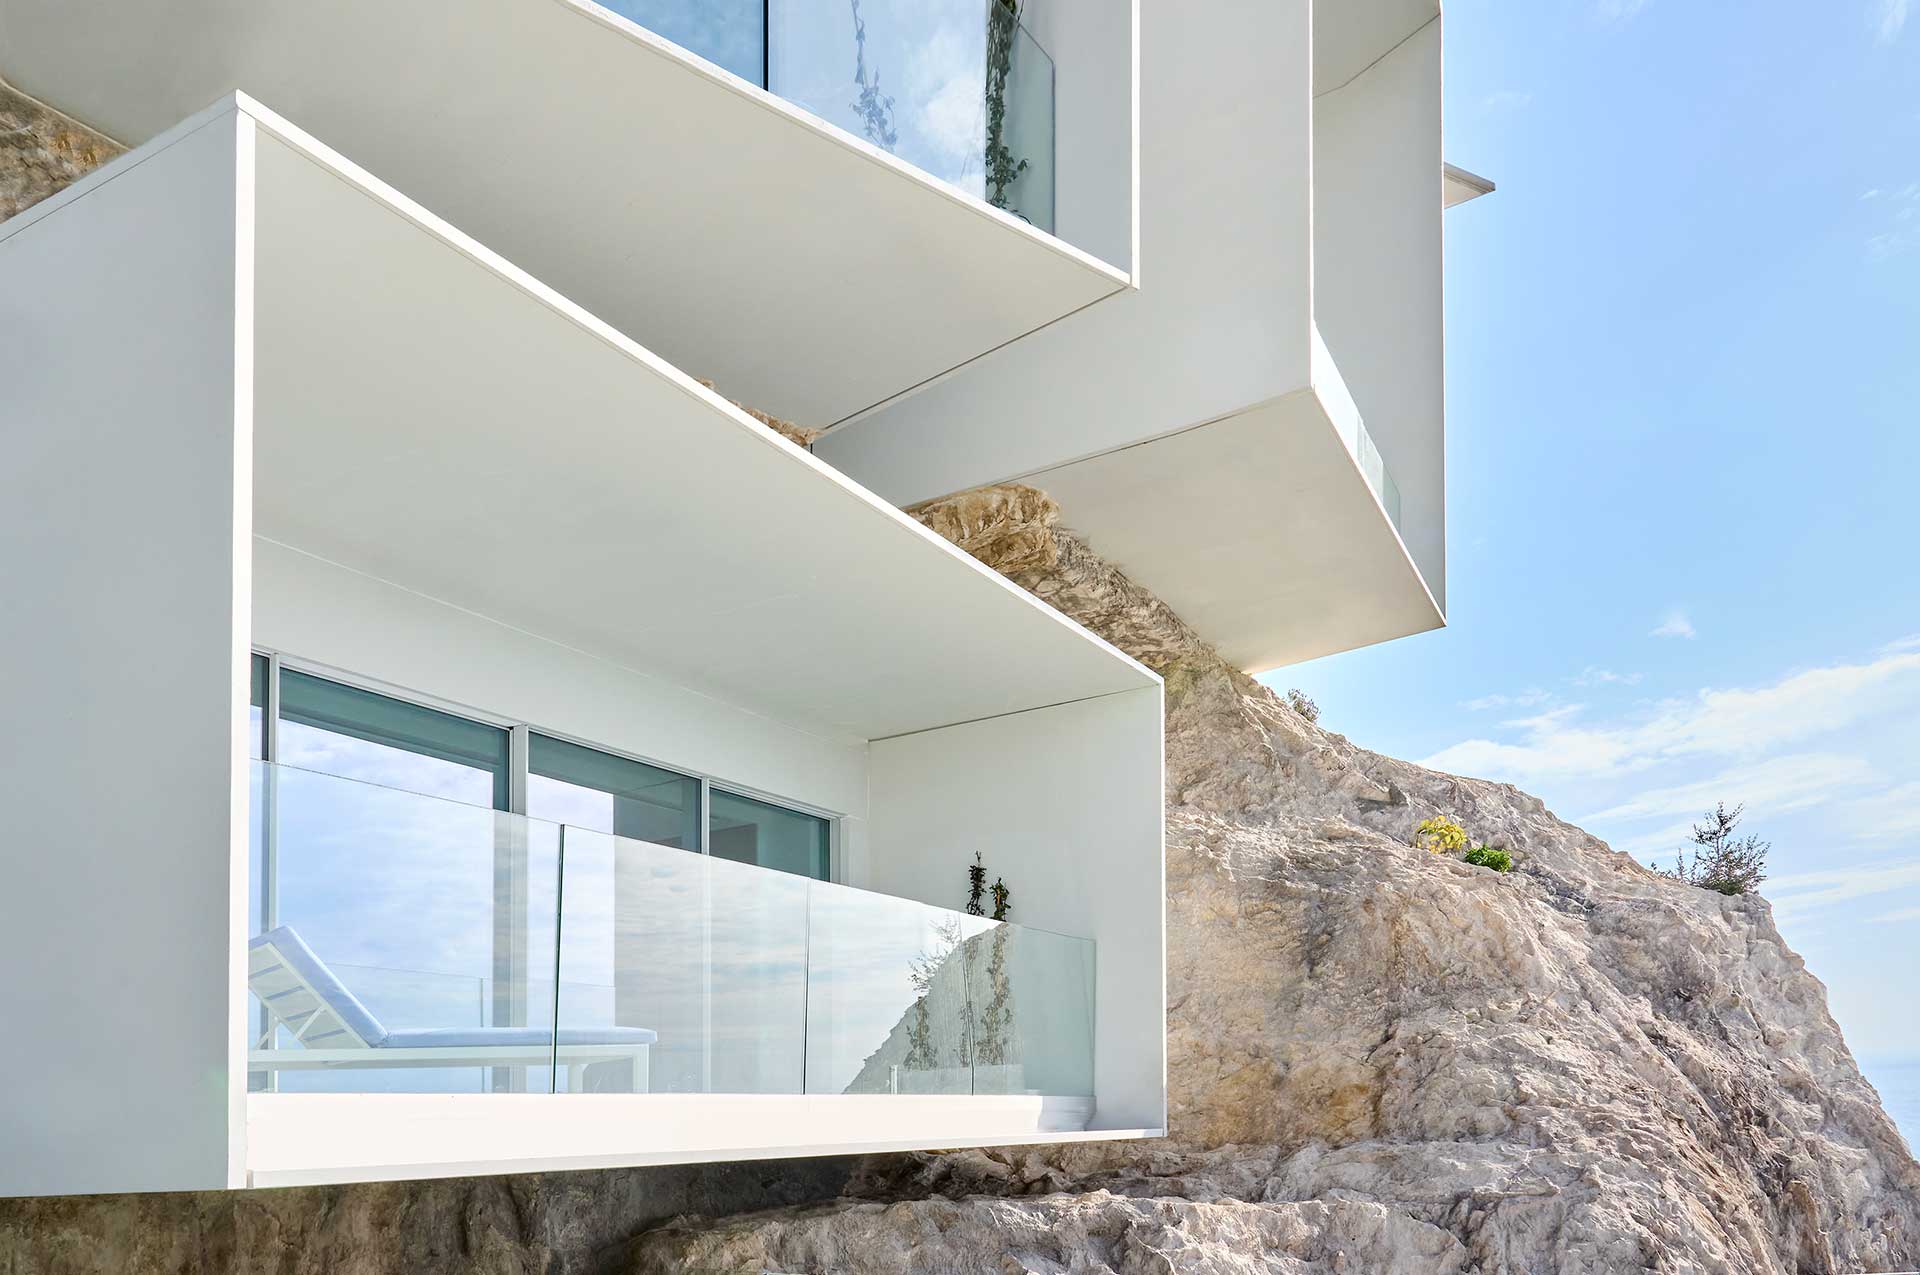 The modern geometric-style white balconies built into the dramatic cliff side